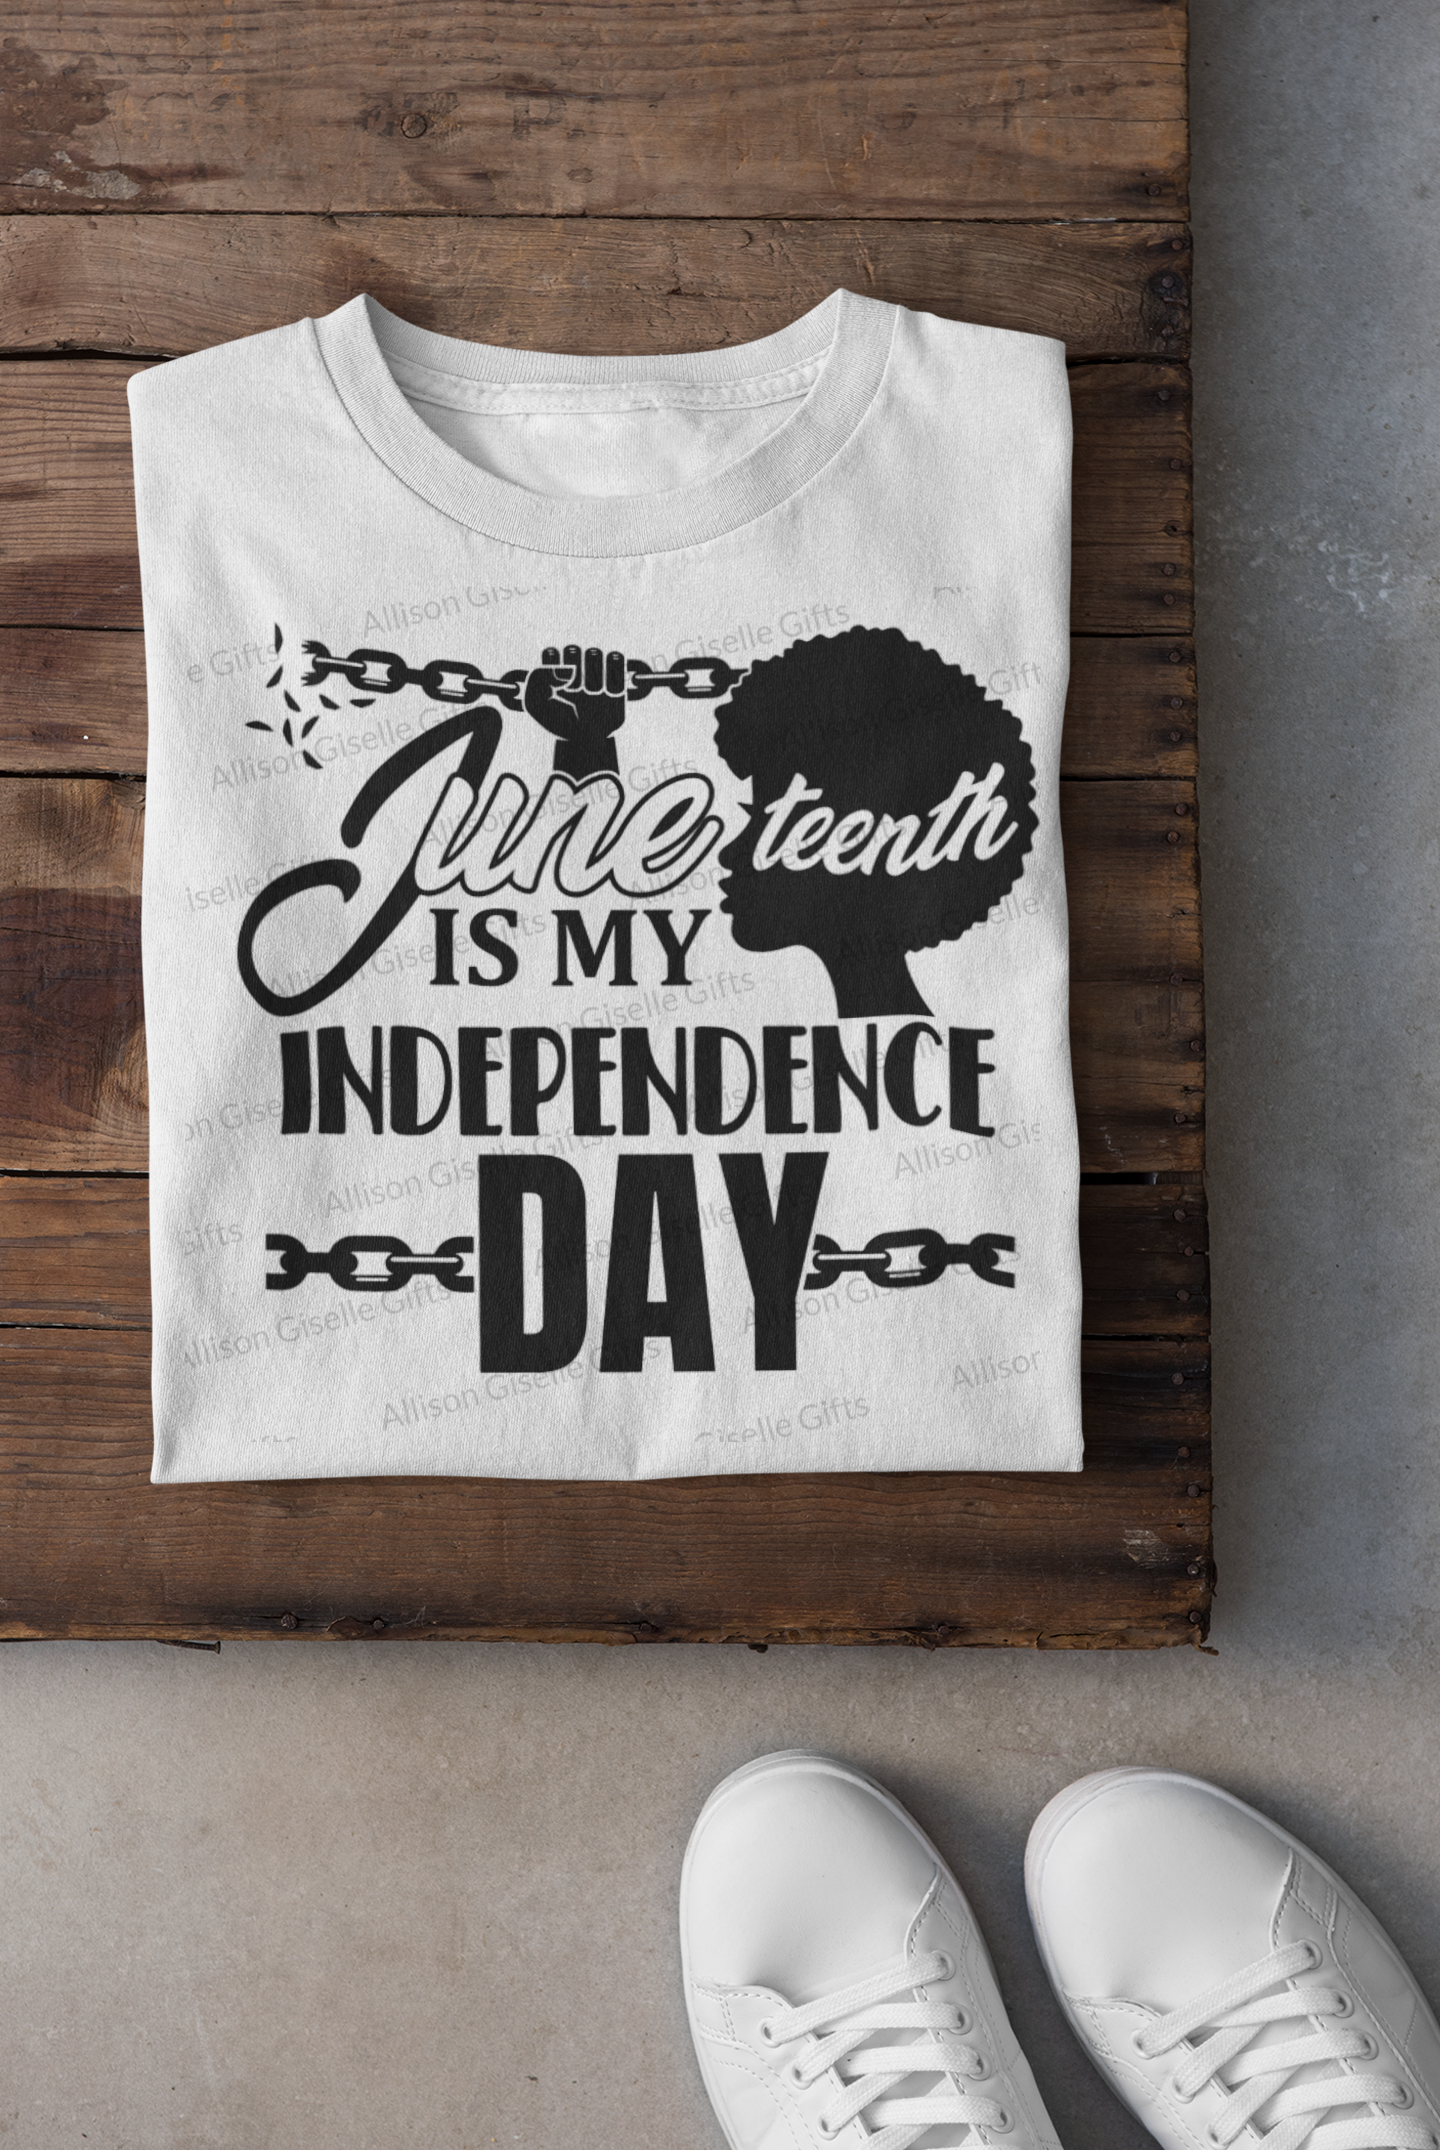 Juneteenth Is My Independence Day T-Shirt, Celebration Shirt, Freedom Day Shirt, 1865 Shirt, Black Owned Shirt